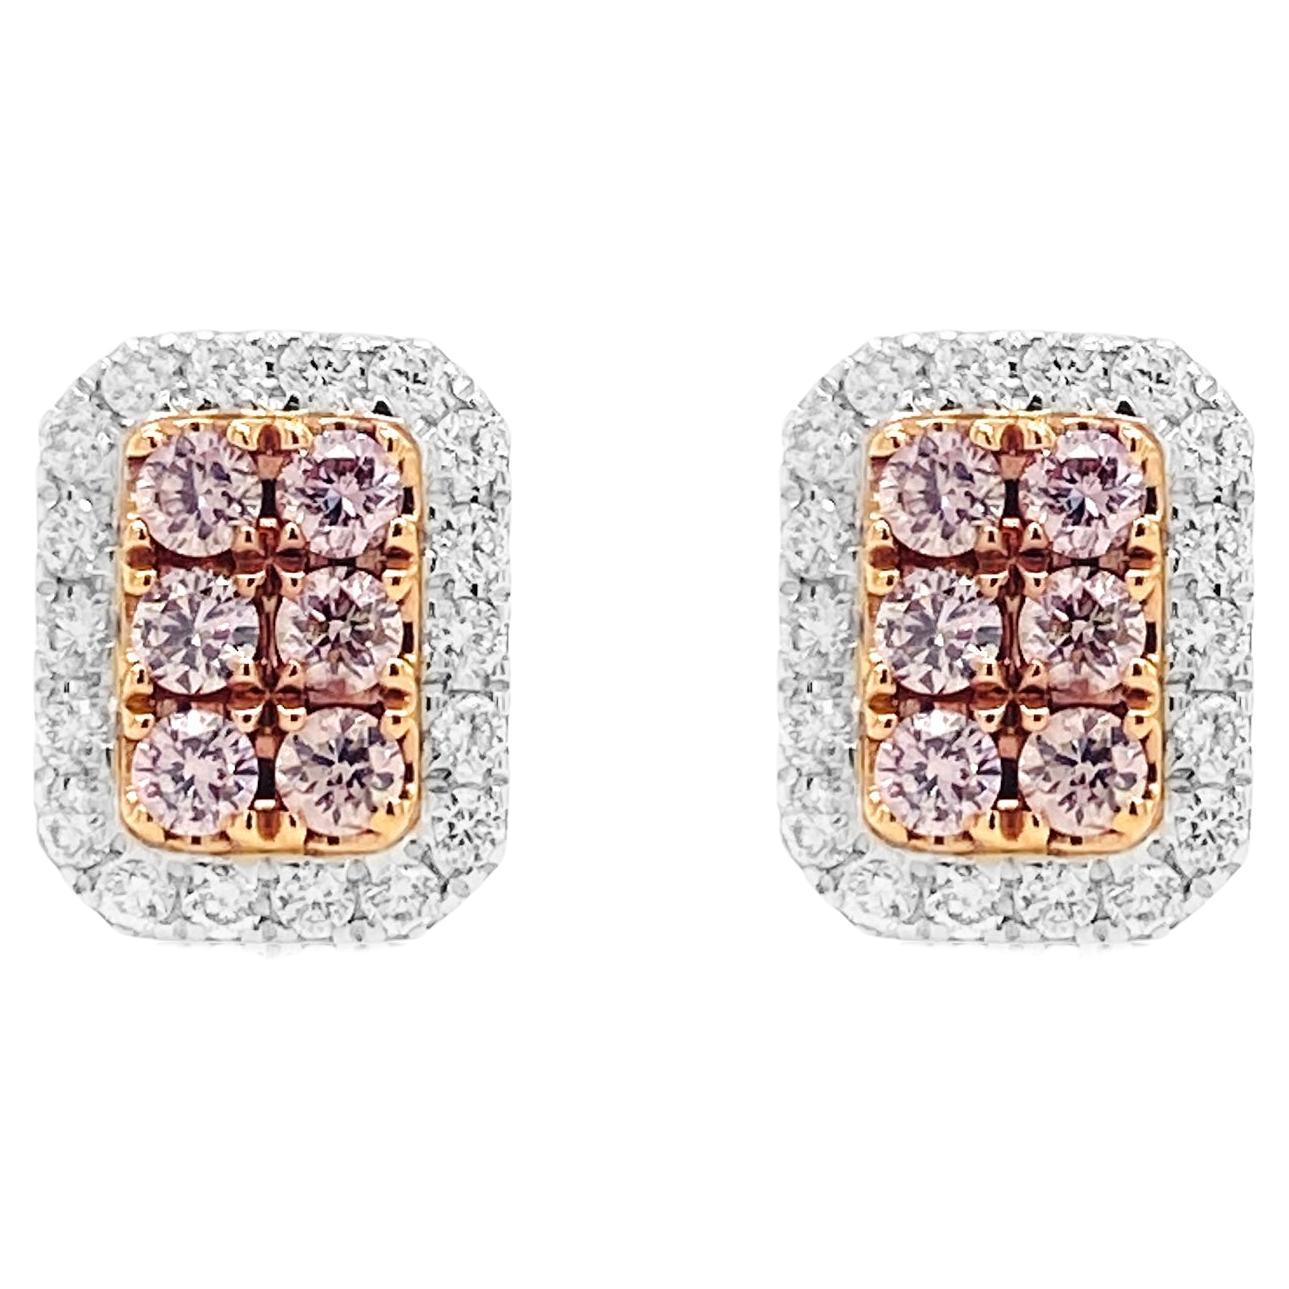 Stud Earrings with Argyle Pink Diamonds